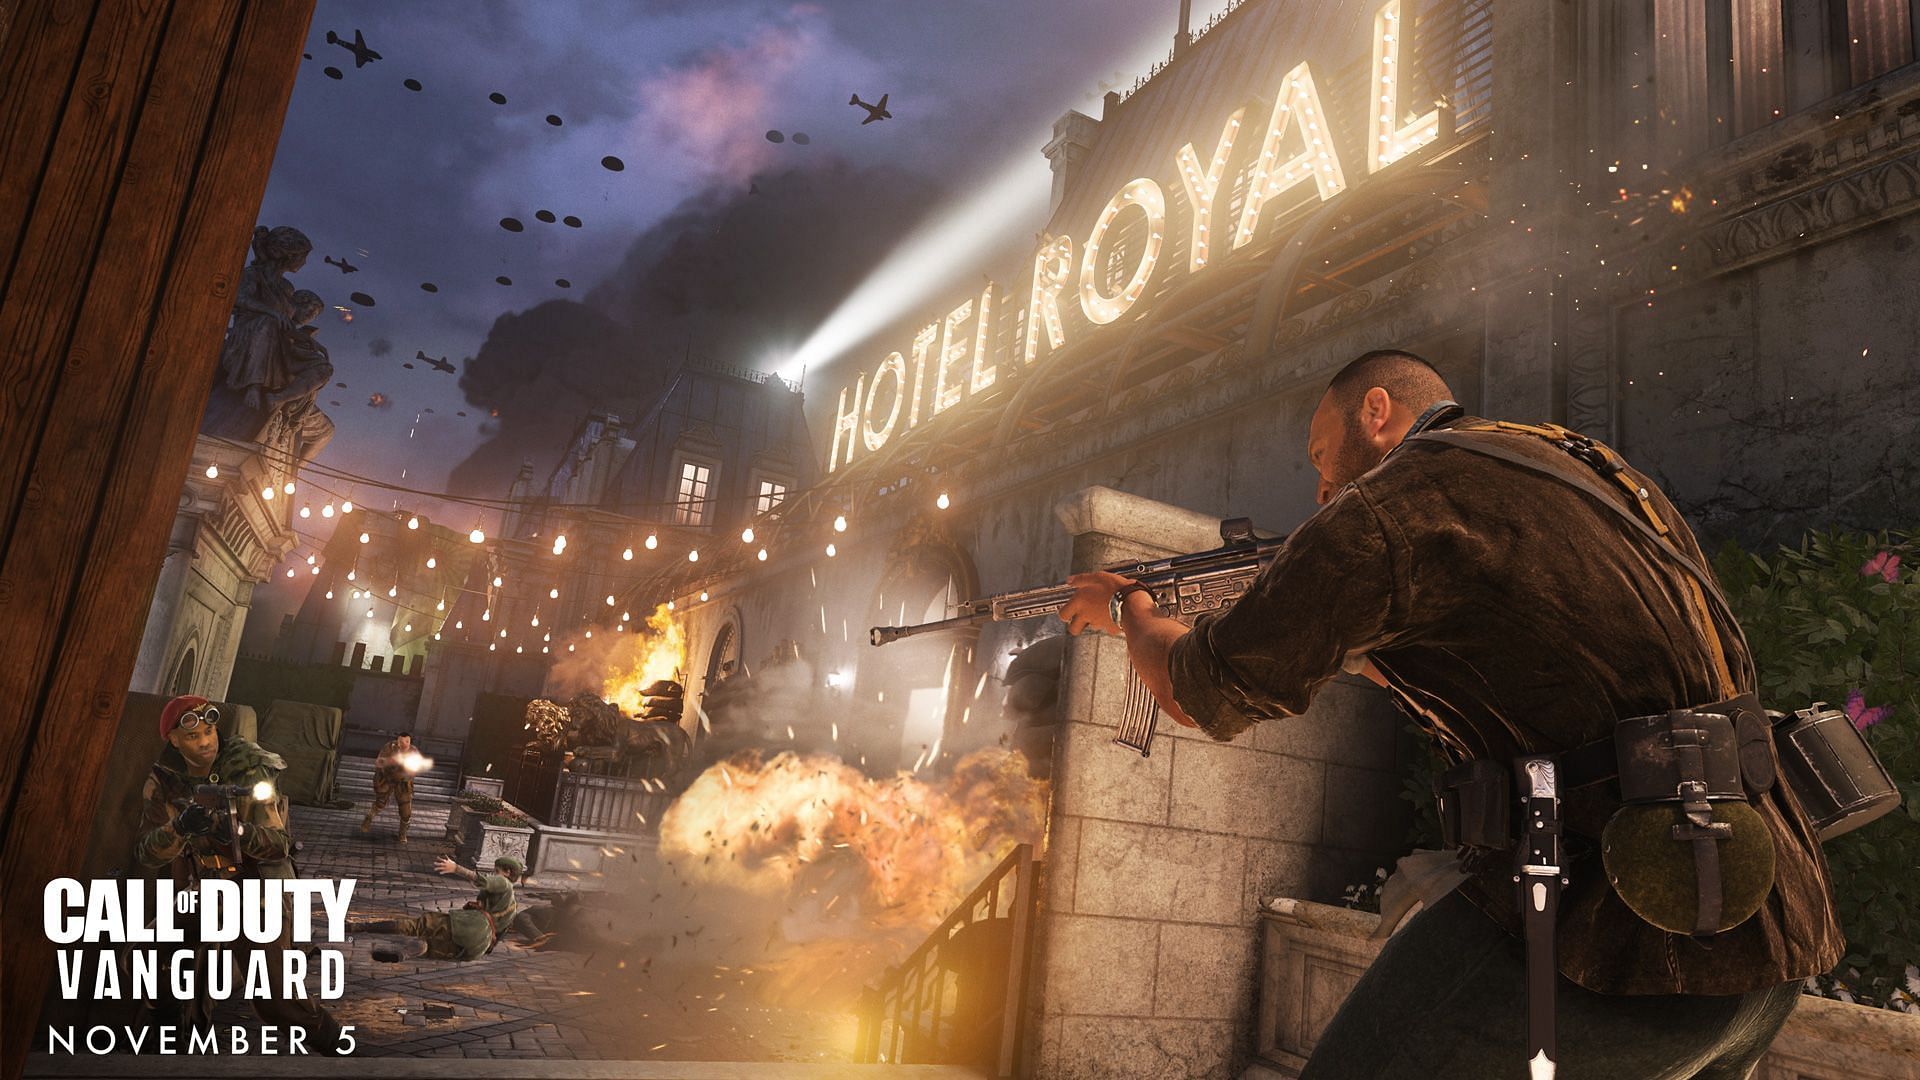 A preview of the Hotel Royal map (Image via Activision)